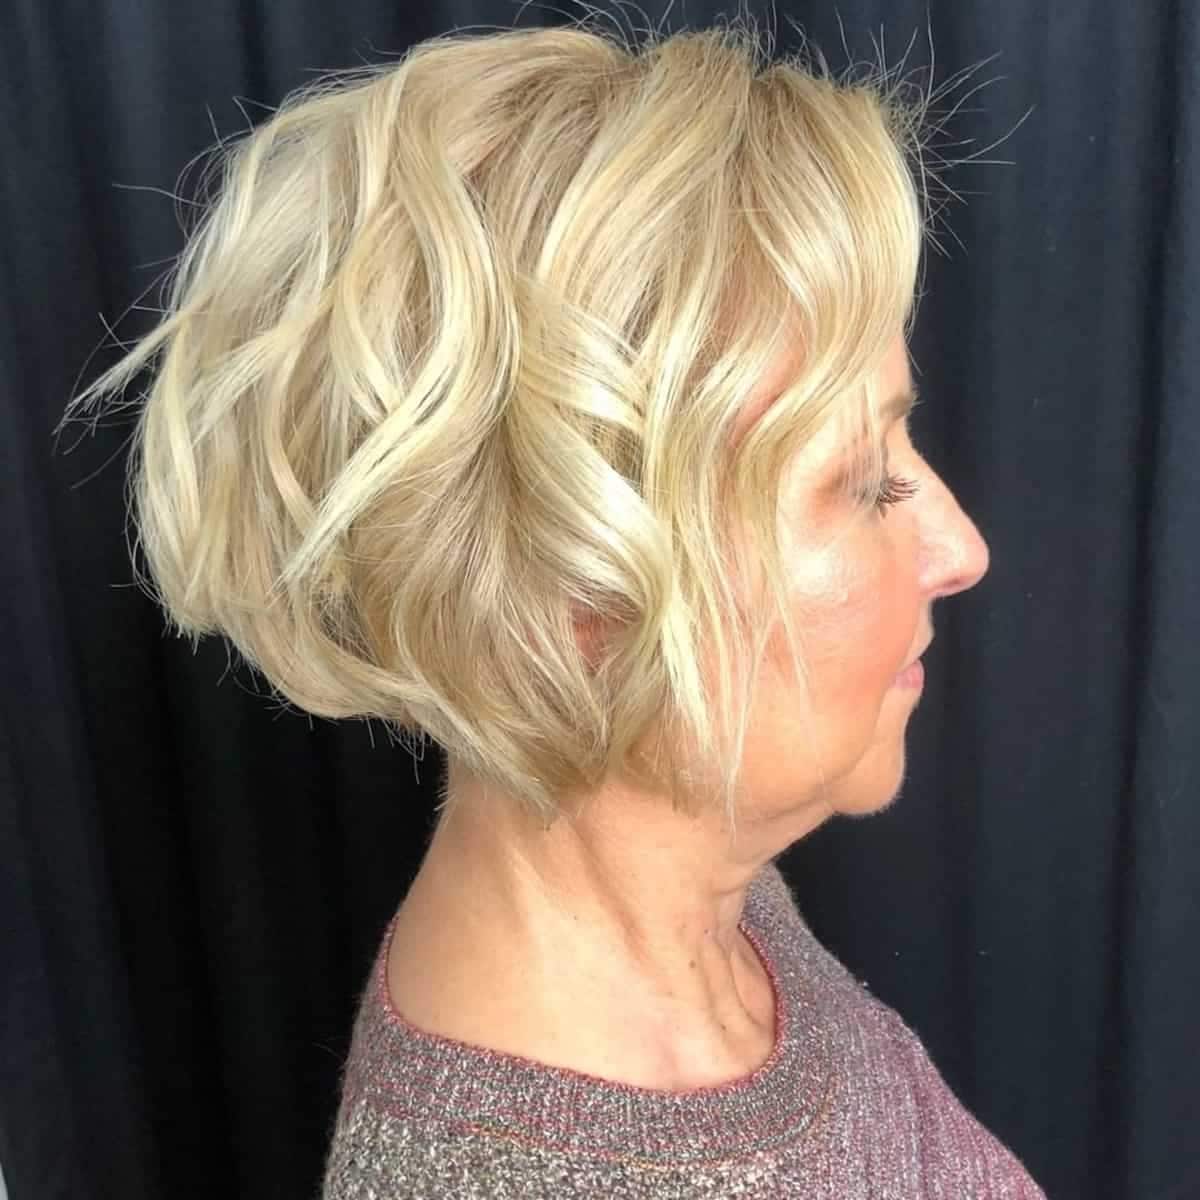 The Best Short HairCuts For Women Over 50 With Thin Hair - YouTube